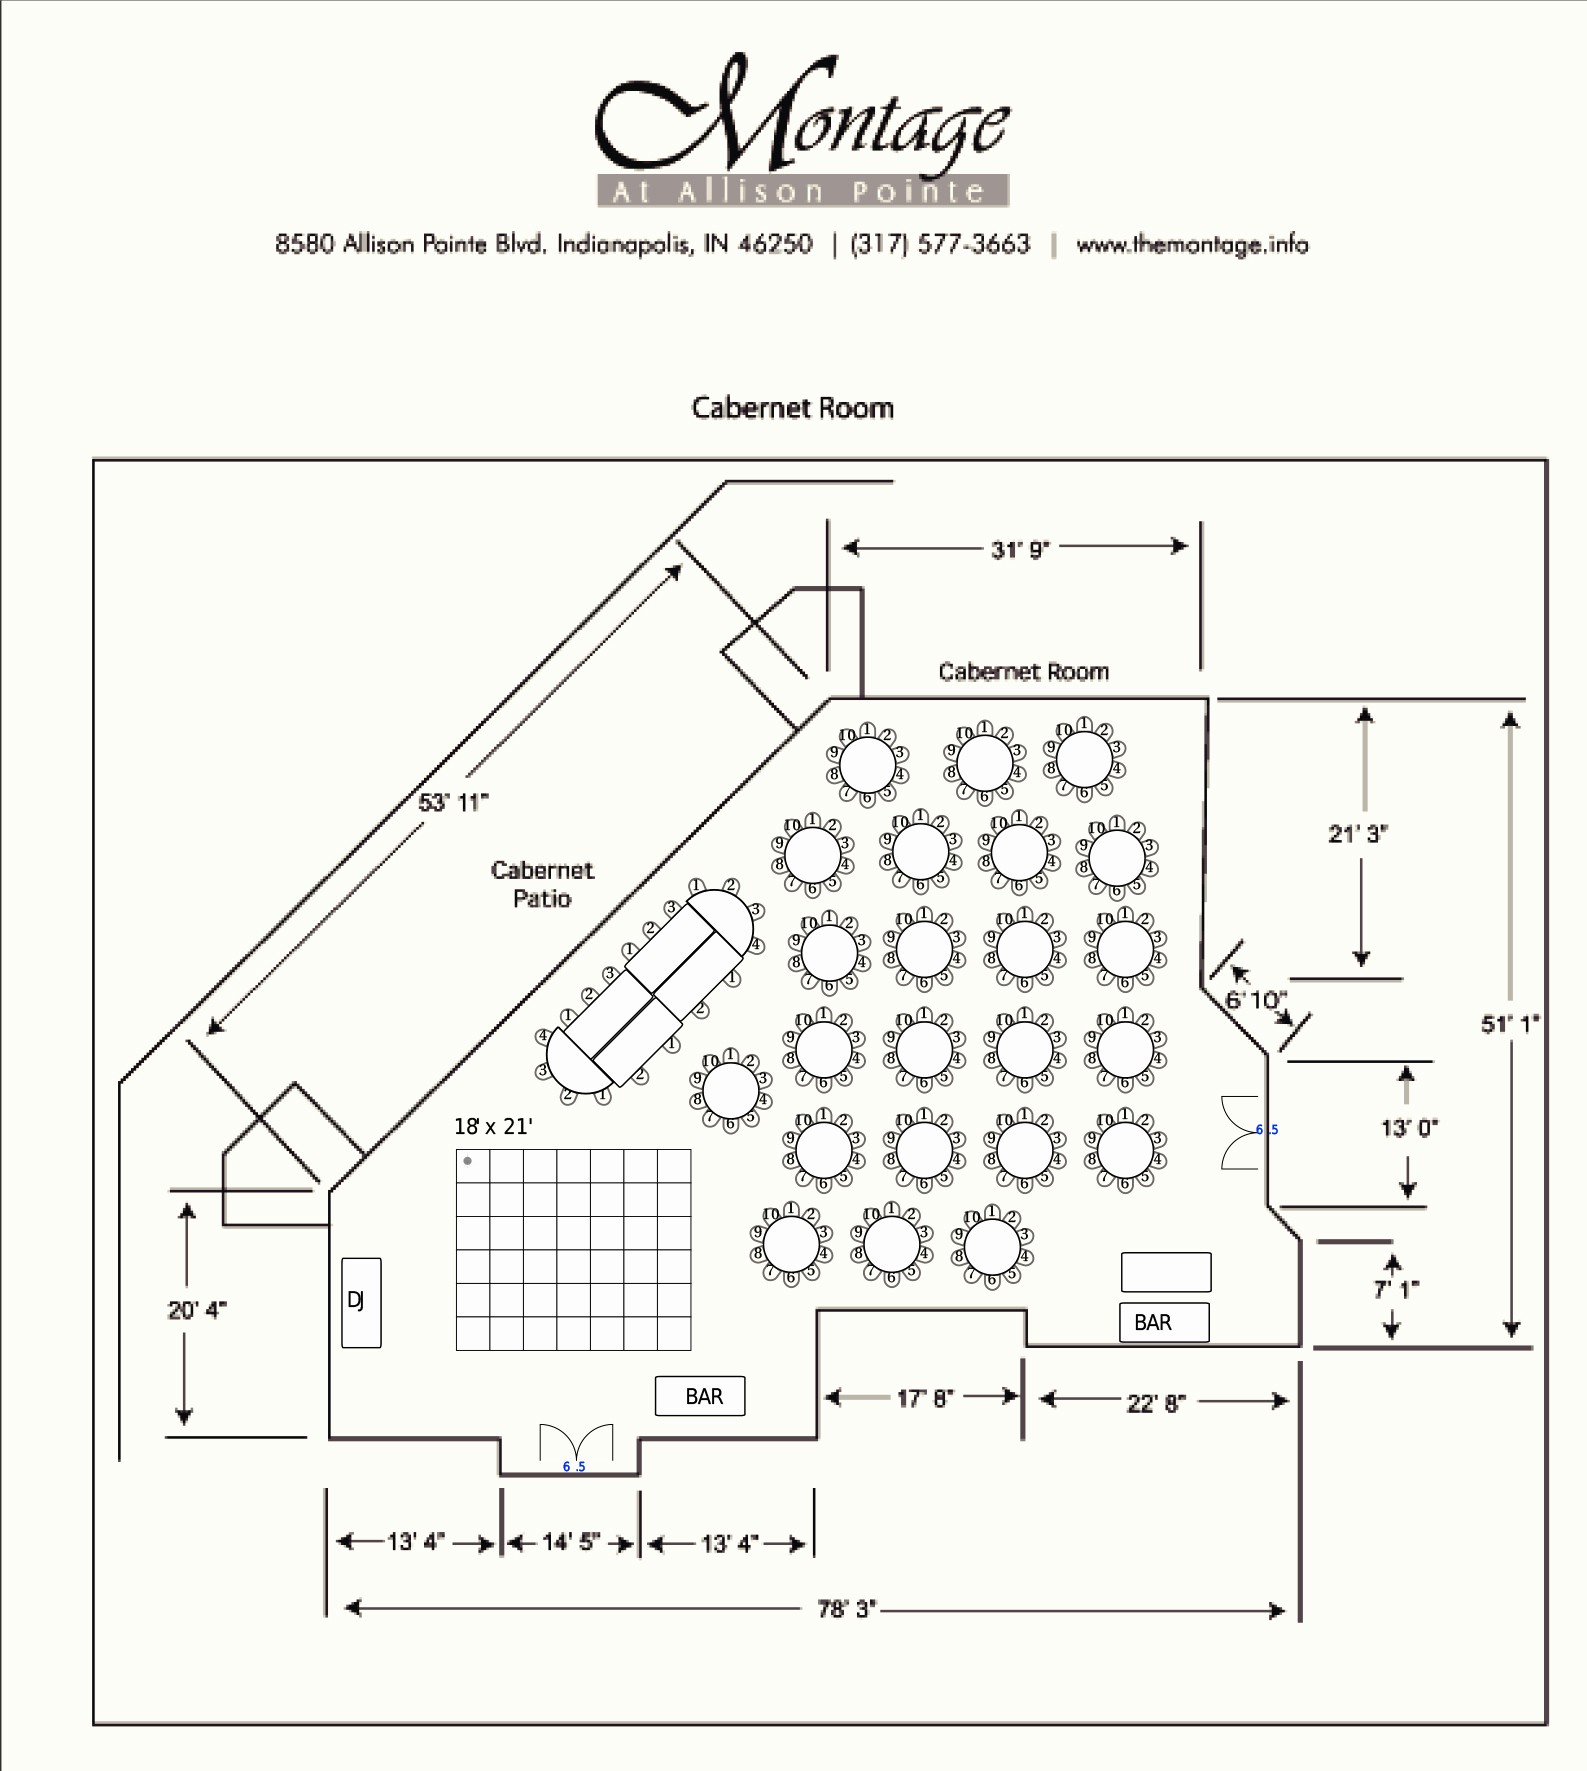 Wedding Seating Charts Templates Free Best Of Seating Chart for Wedding Reception Template